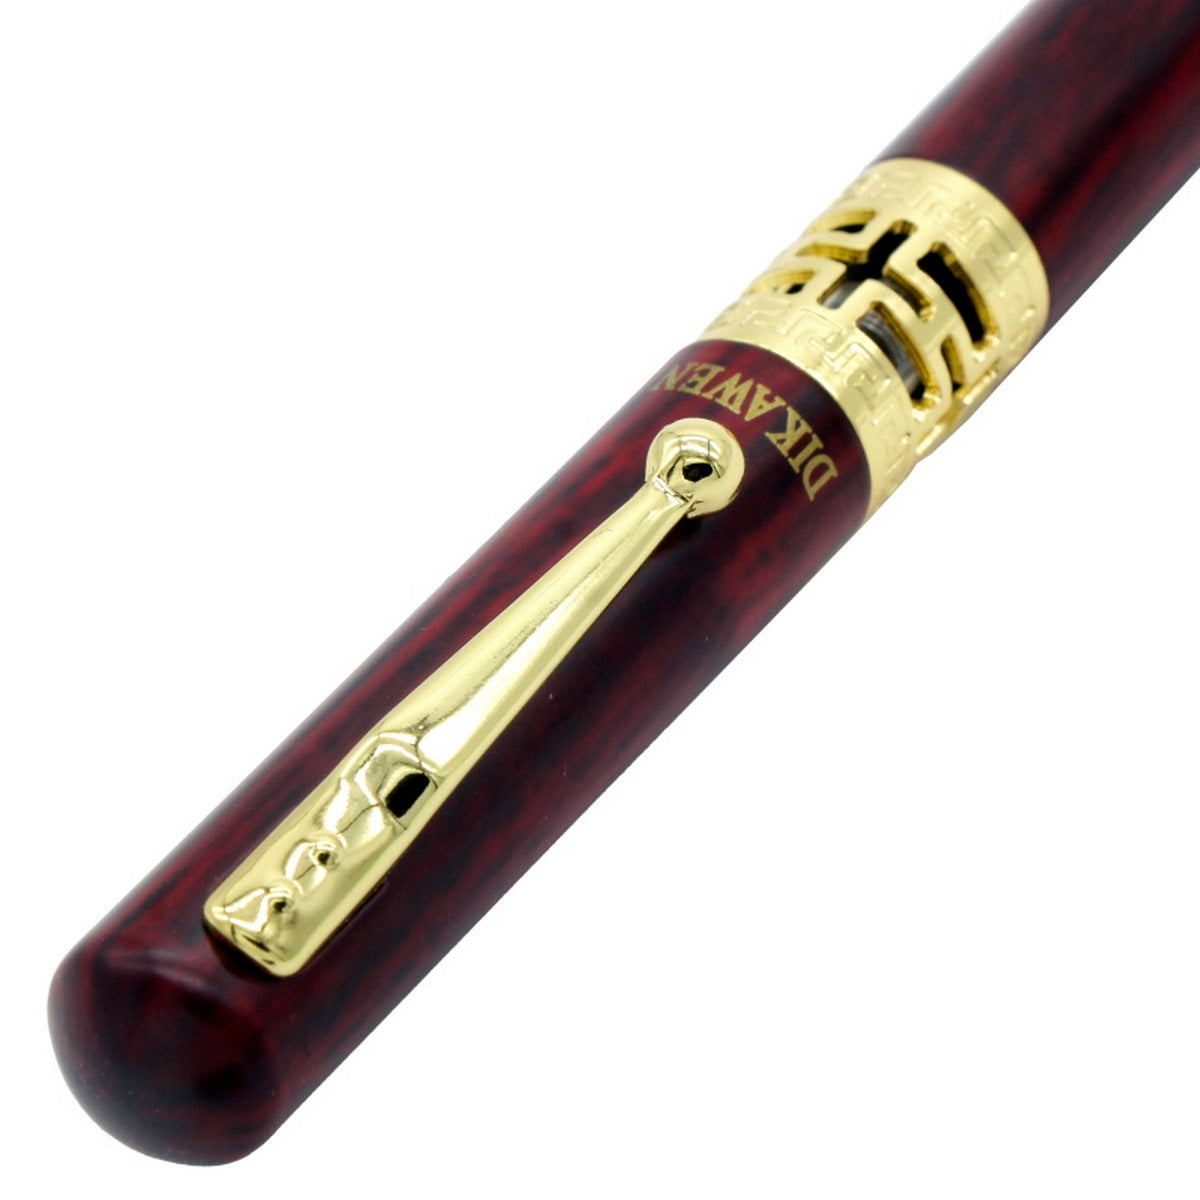 jags-mumbai Miniature Elegant Fountain Pen with Color Wood Finish and Golden Clip - Model 8060FPC